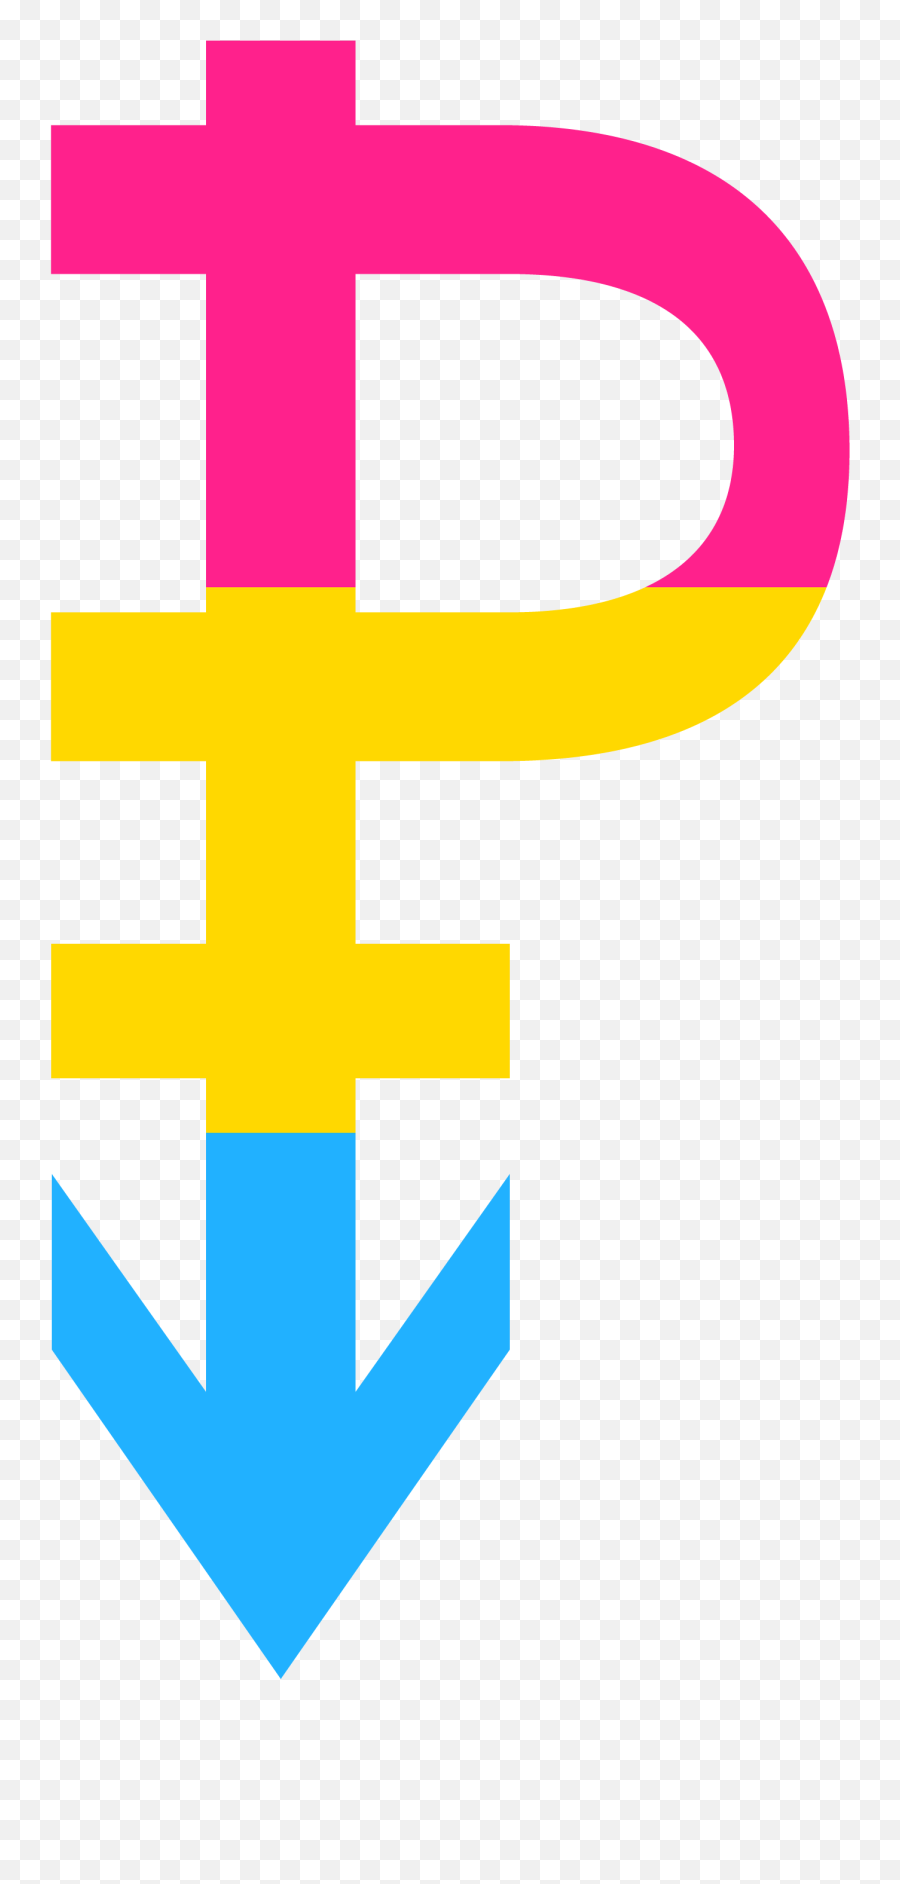 I tried making a pansexual flag inspired background  rpansexual